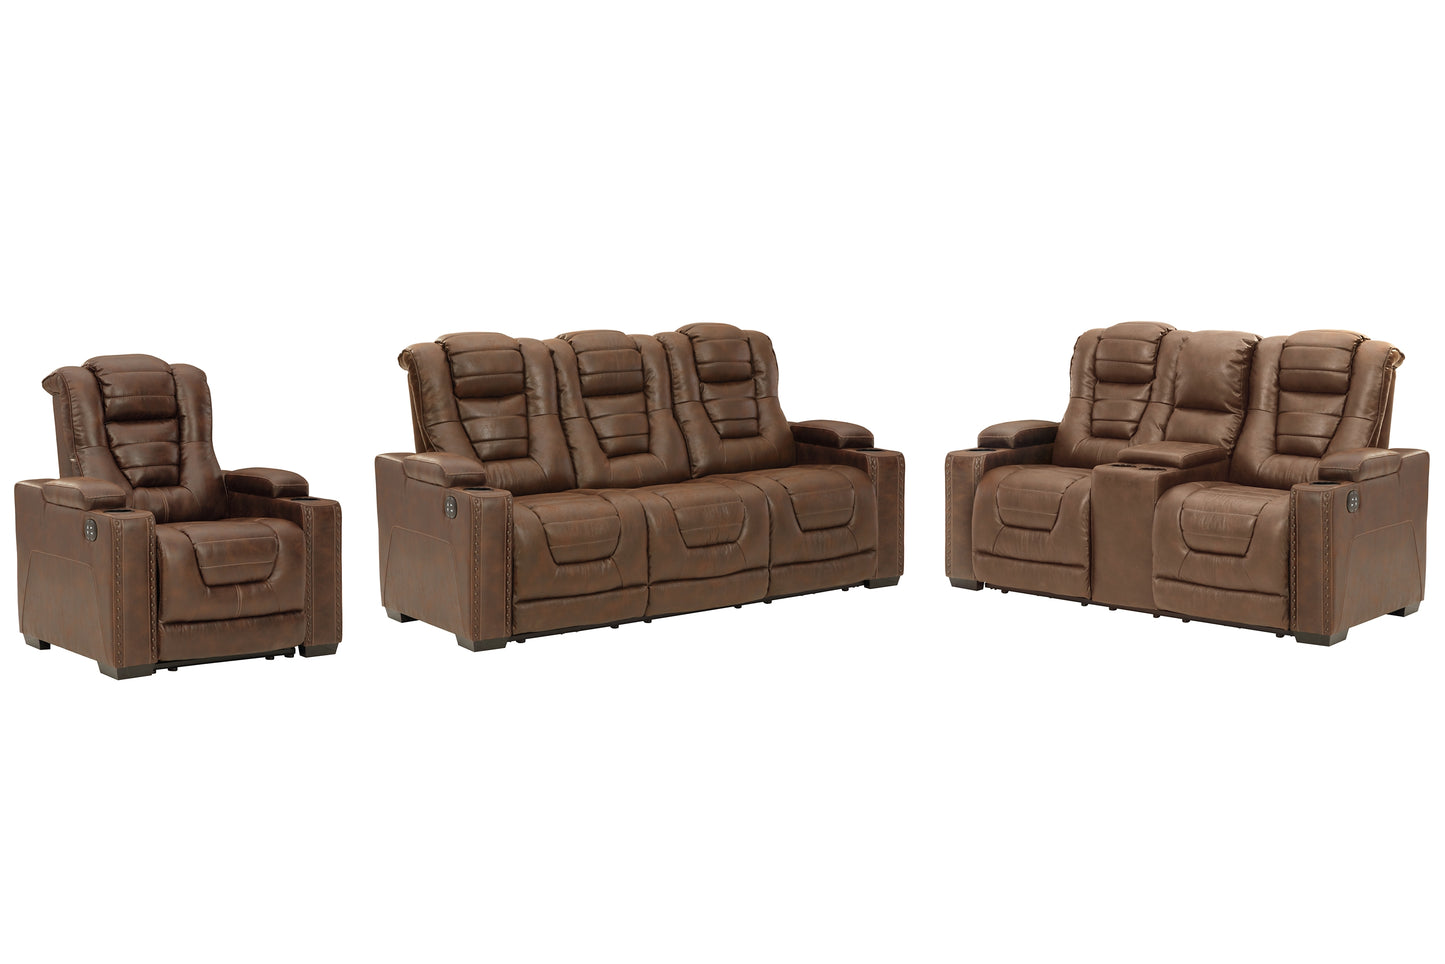 Owner's Box Sofa, Loveseat and Recliner Signature Design by Ashley®